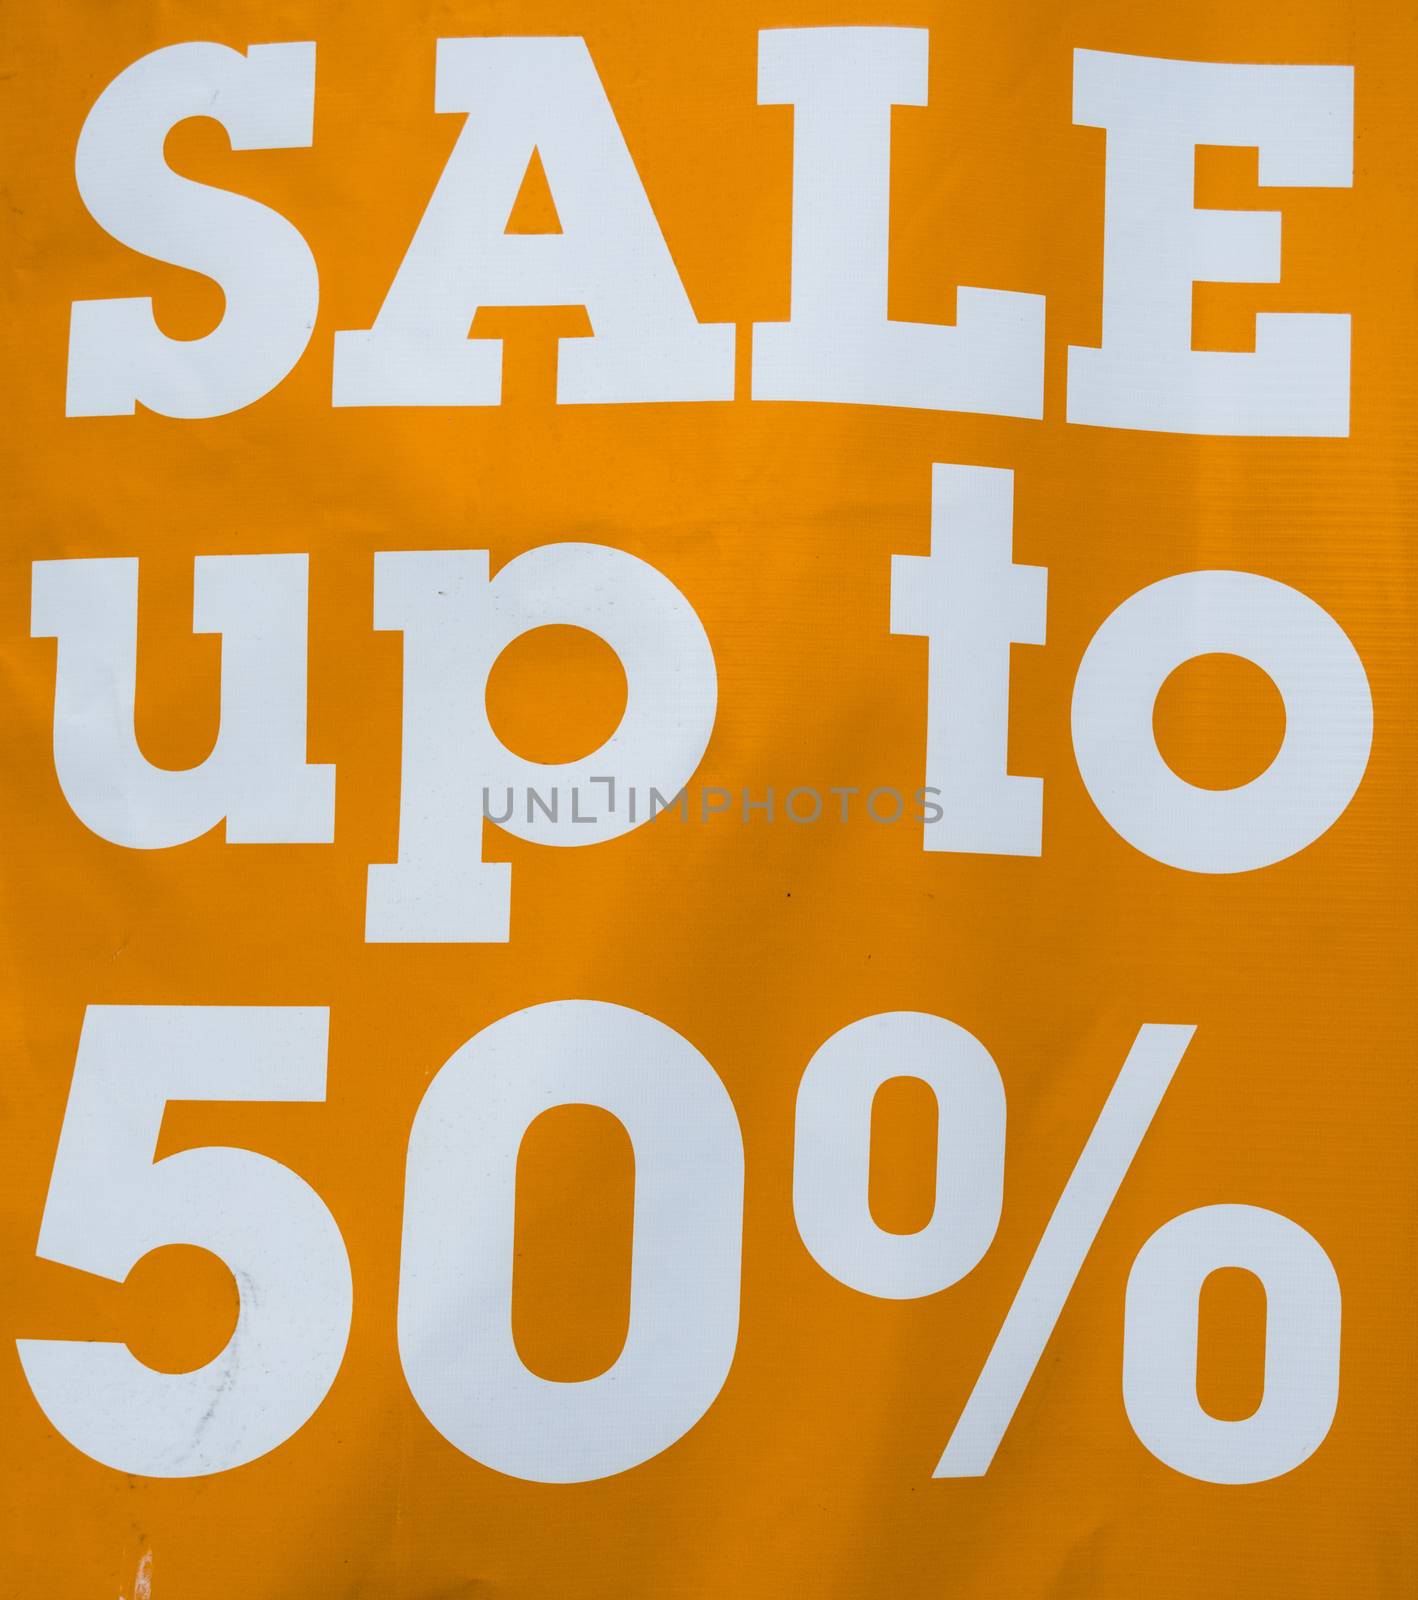 Sale up to 50 Percents Discount Promotion sign by kobfujar